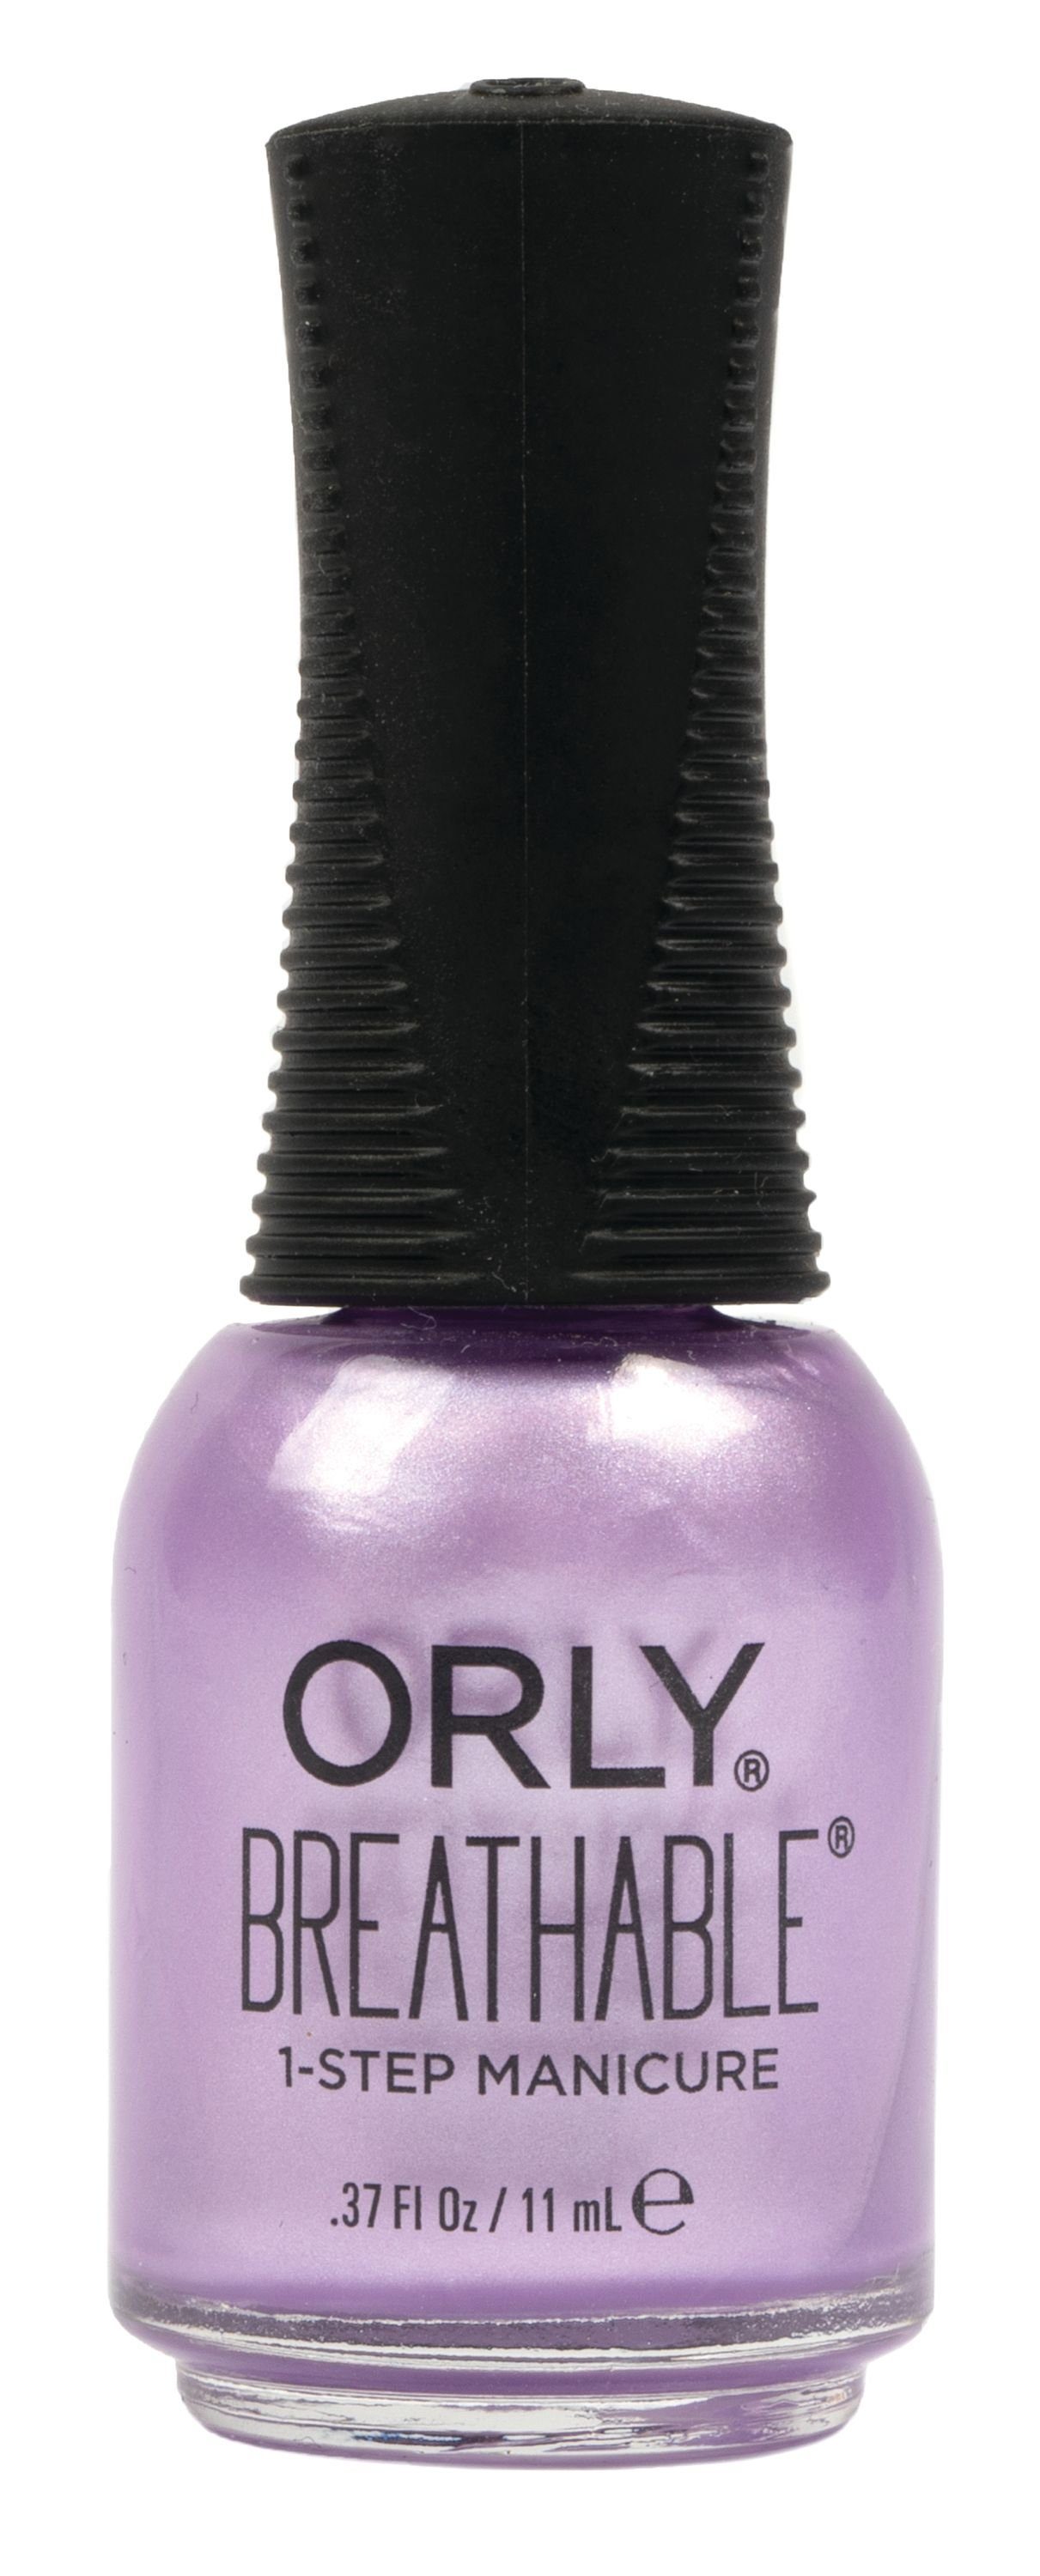 ml ORLY JUST ORLY SQUID-ING, 11 Nagellack Breathable